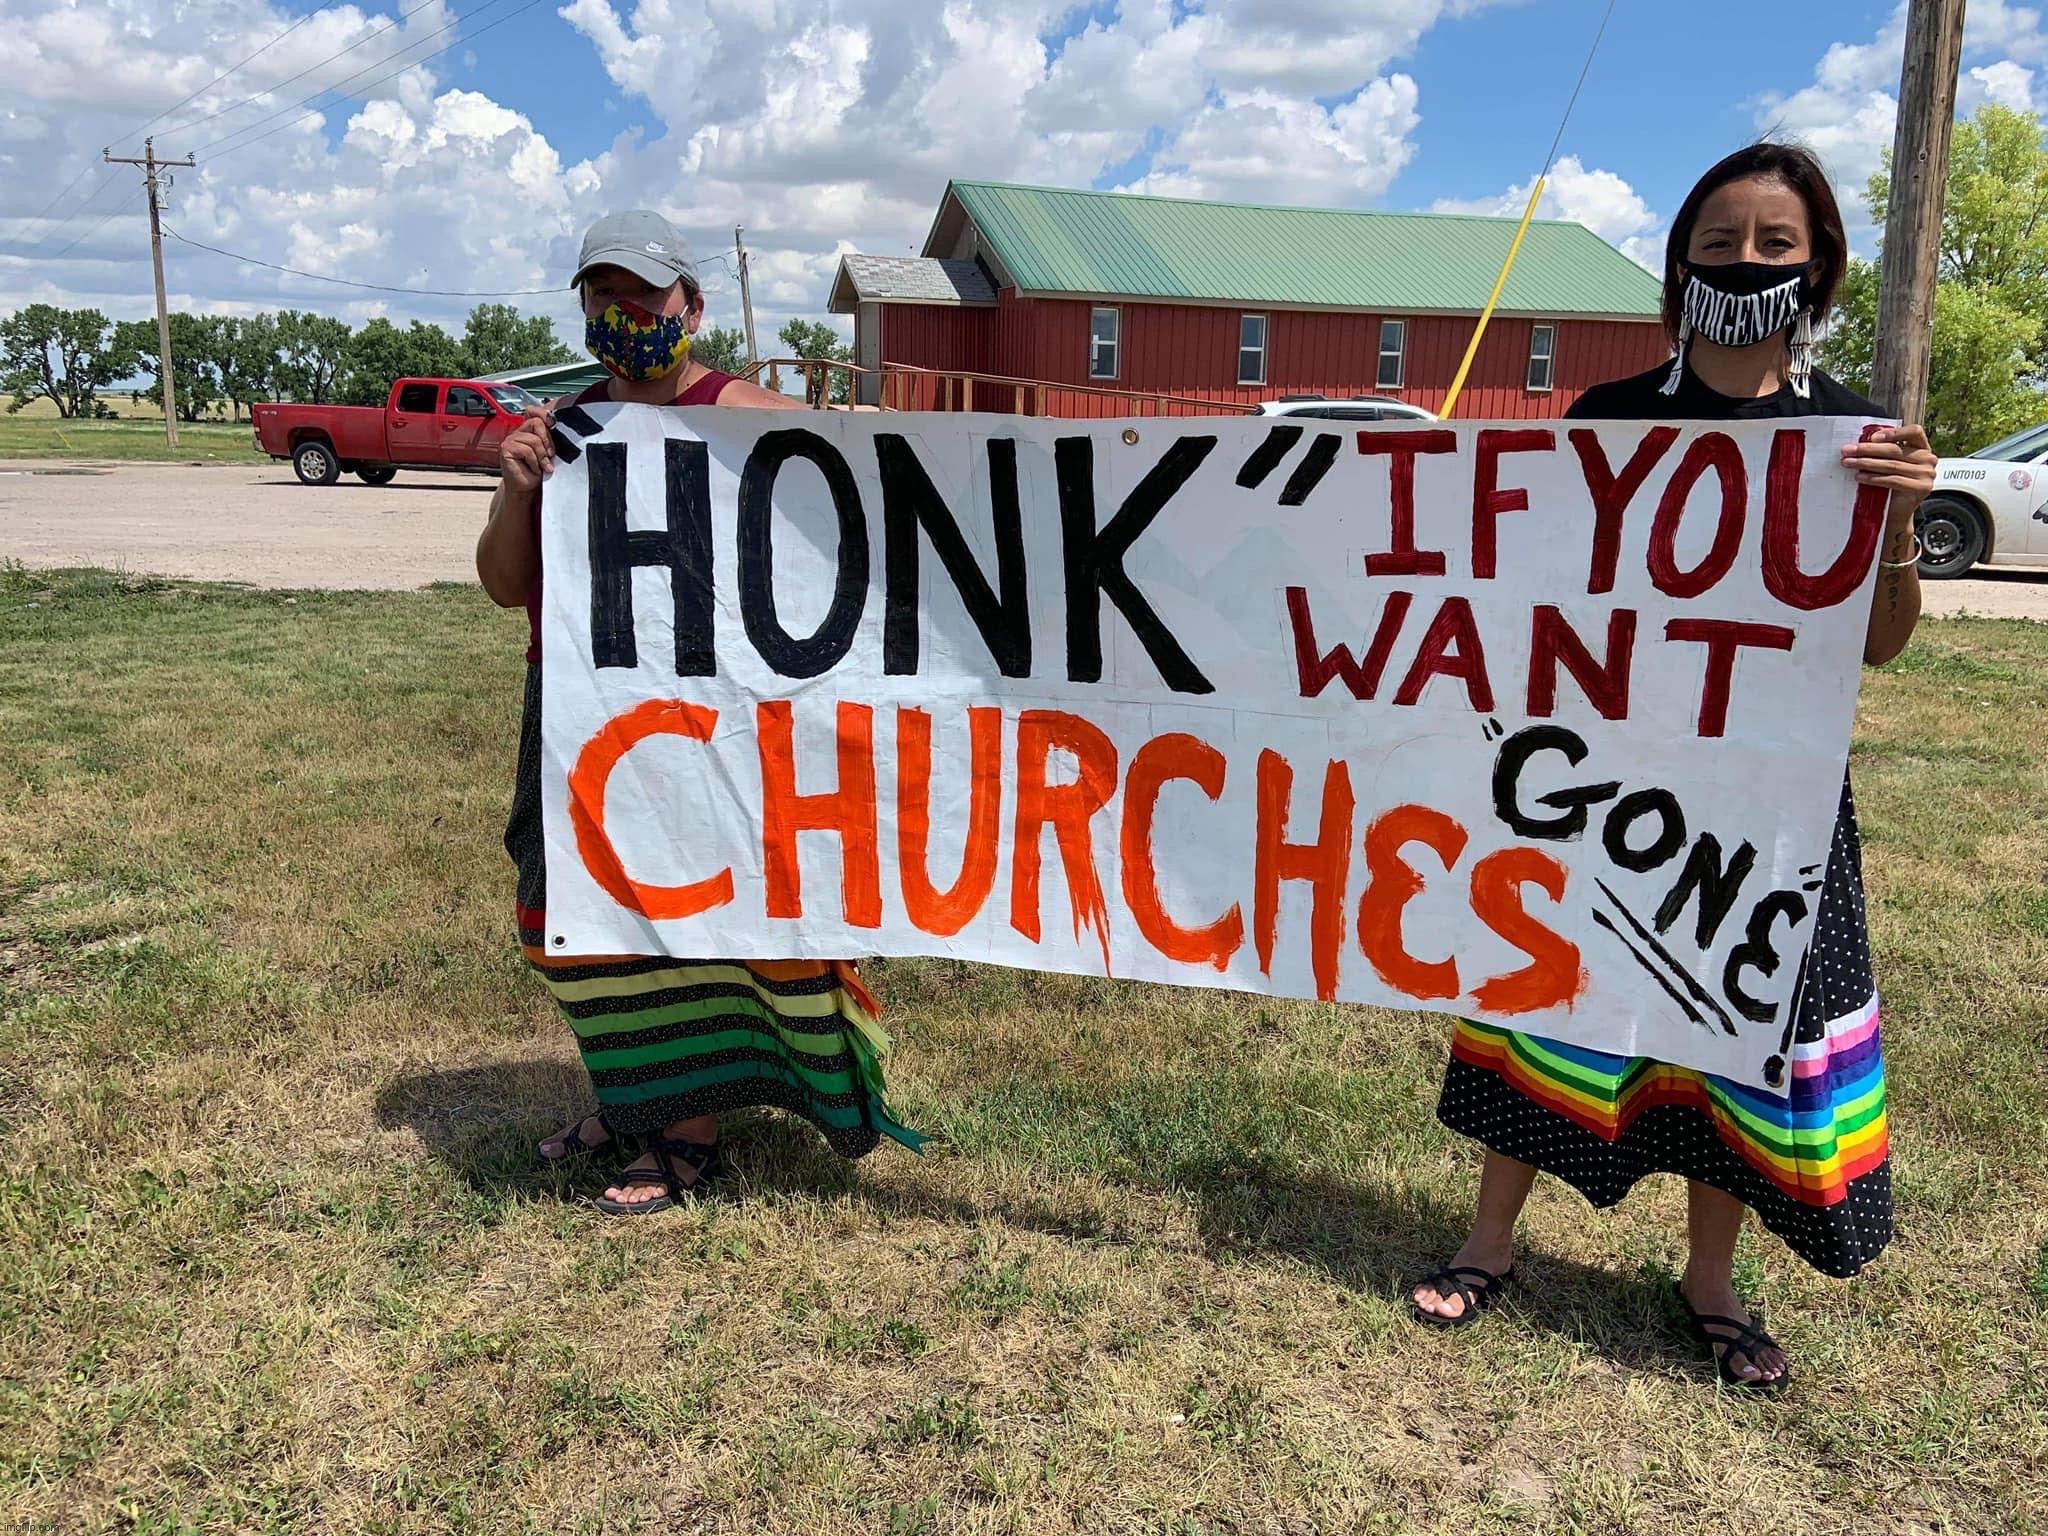 [honks] | image tagged in honk if you want churches gone,repost,church,heathen | made w/ Imgflip meme maker